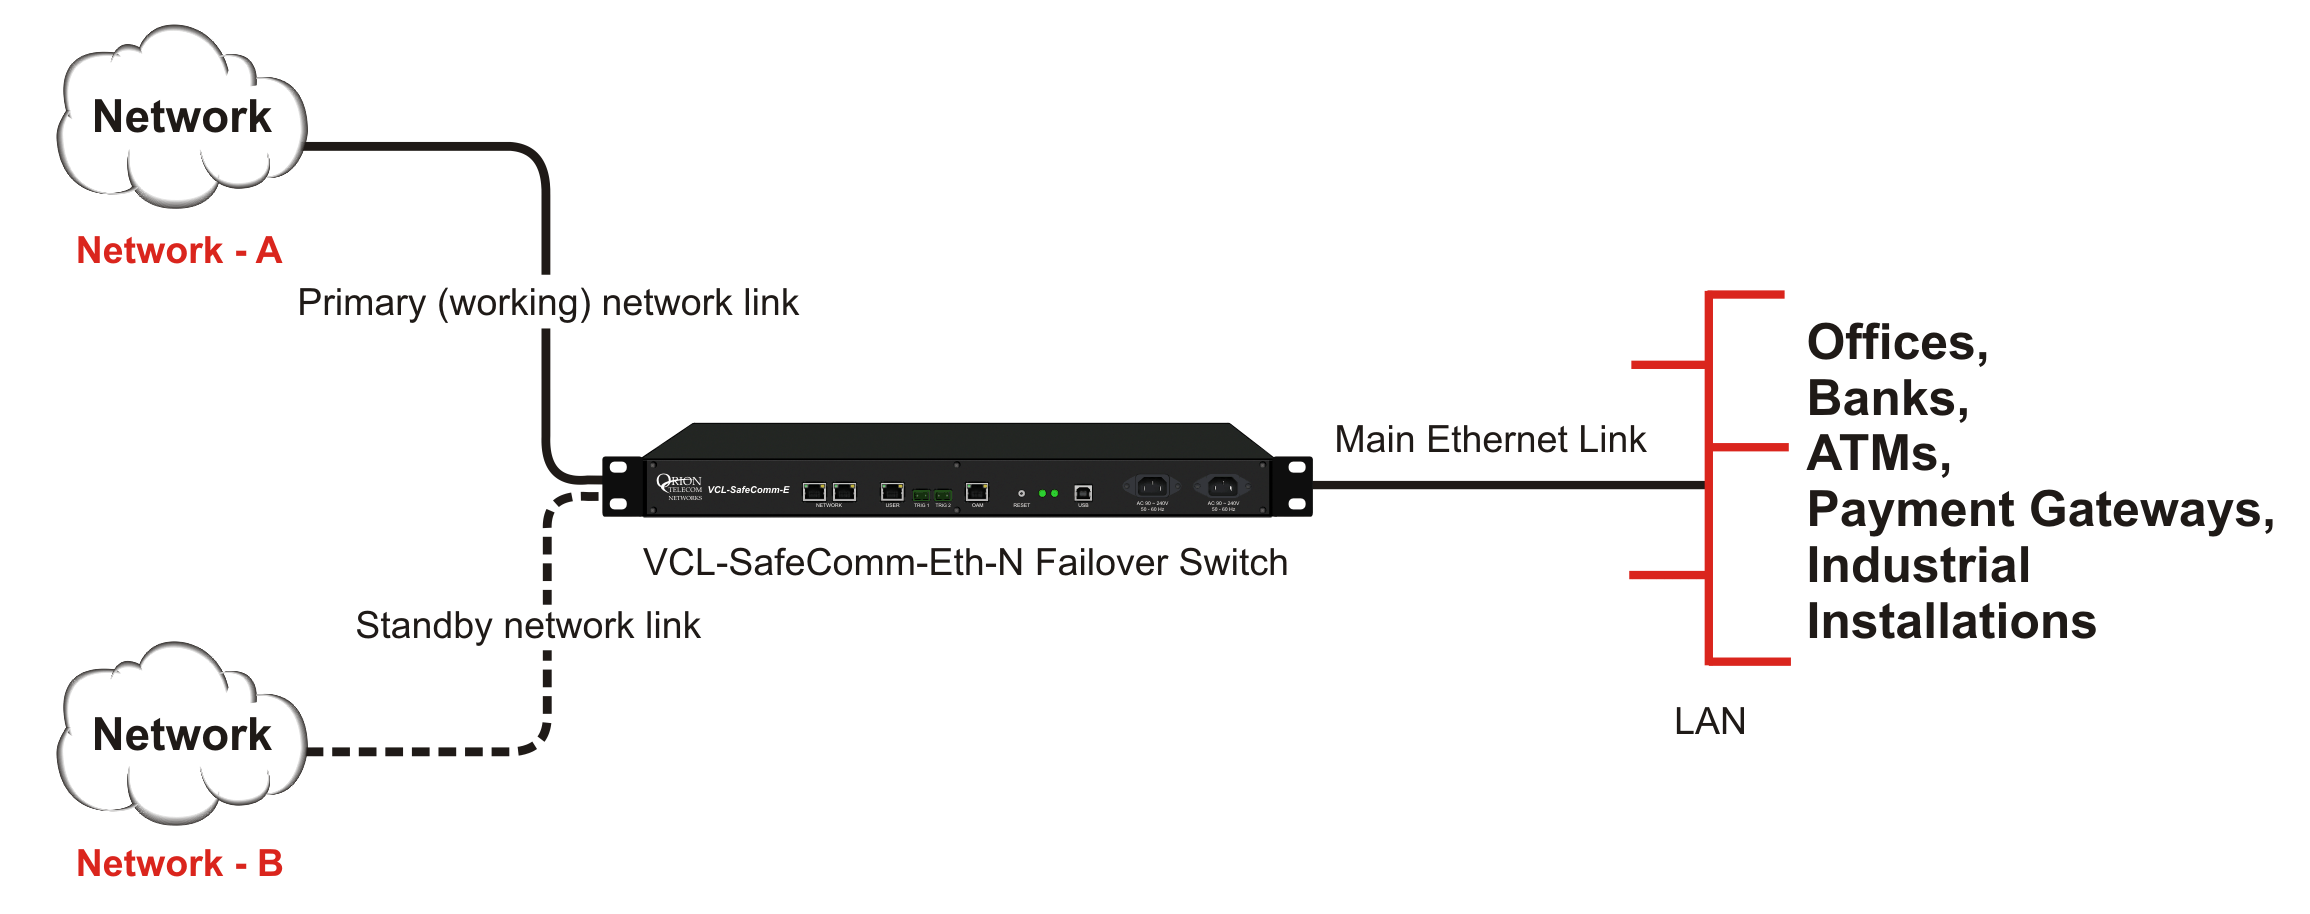 Ethernet Link is connected to Network A